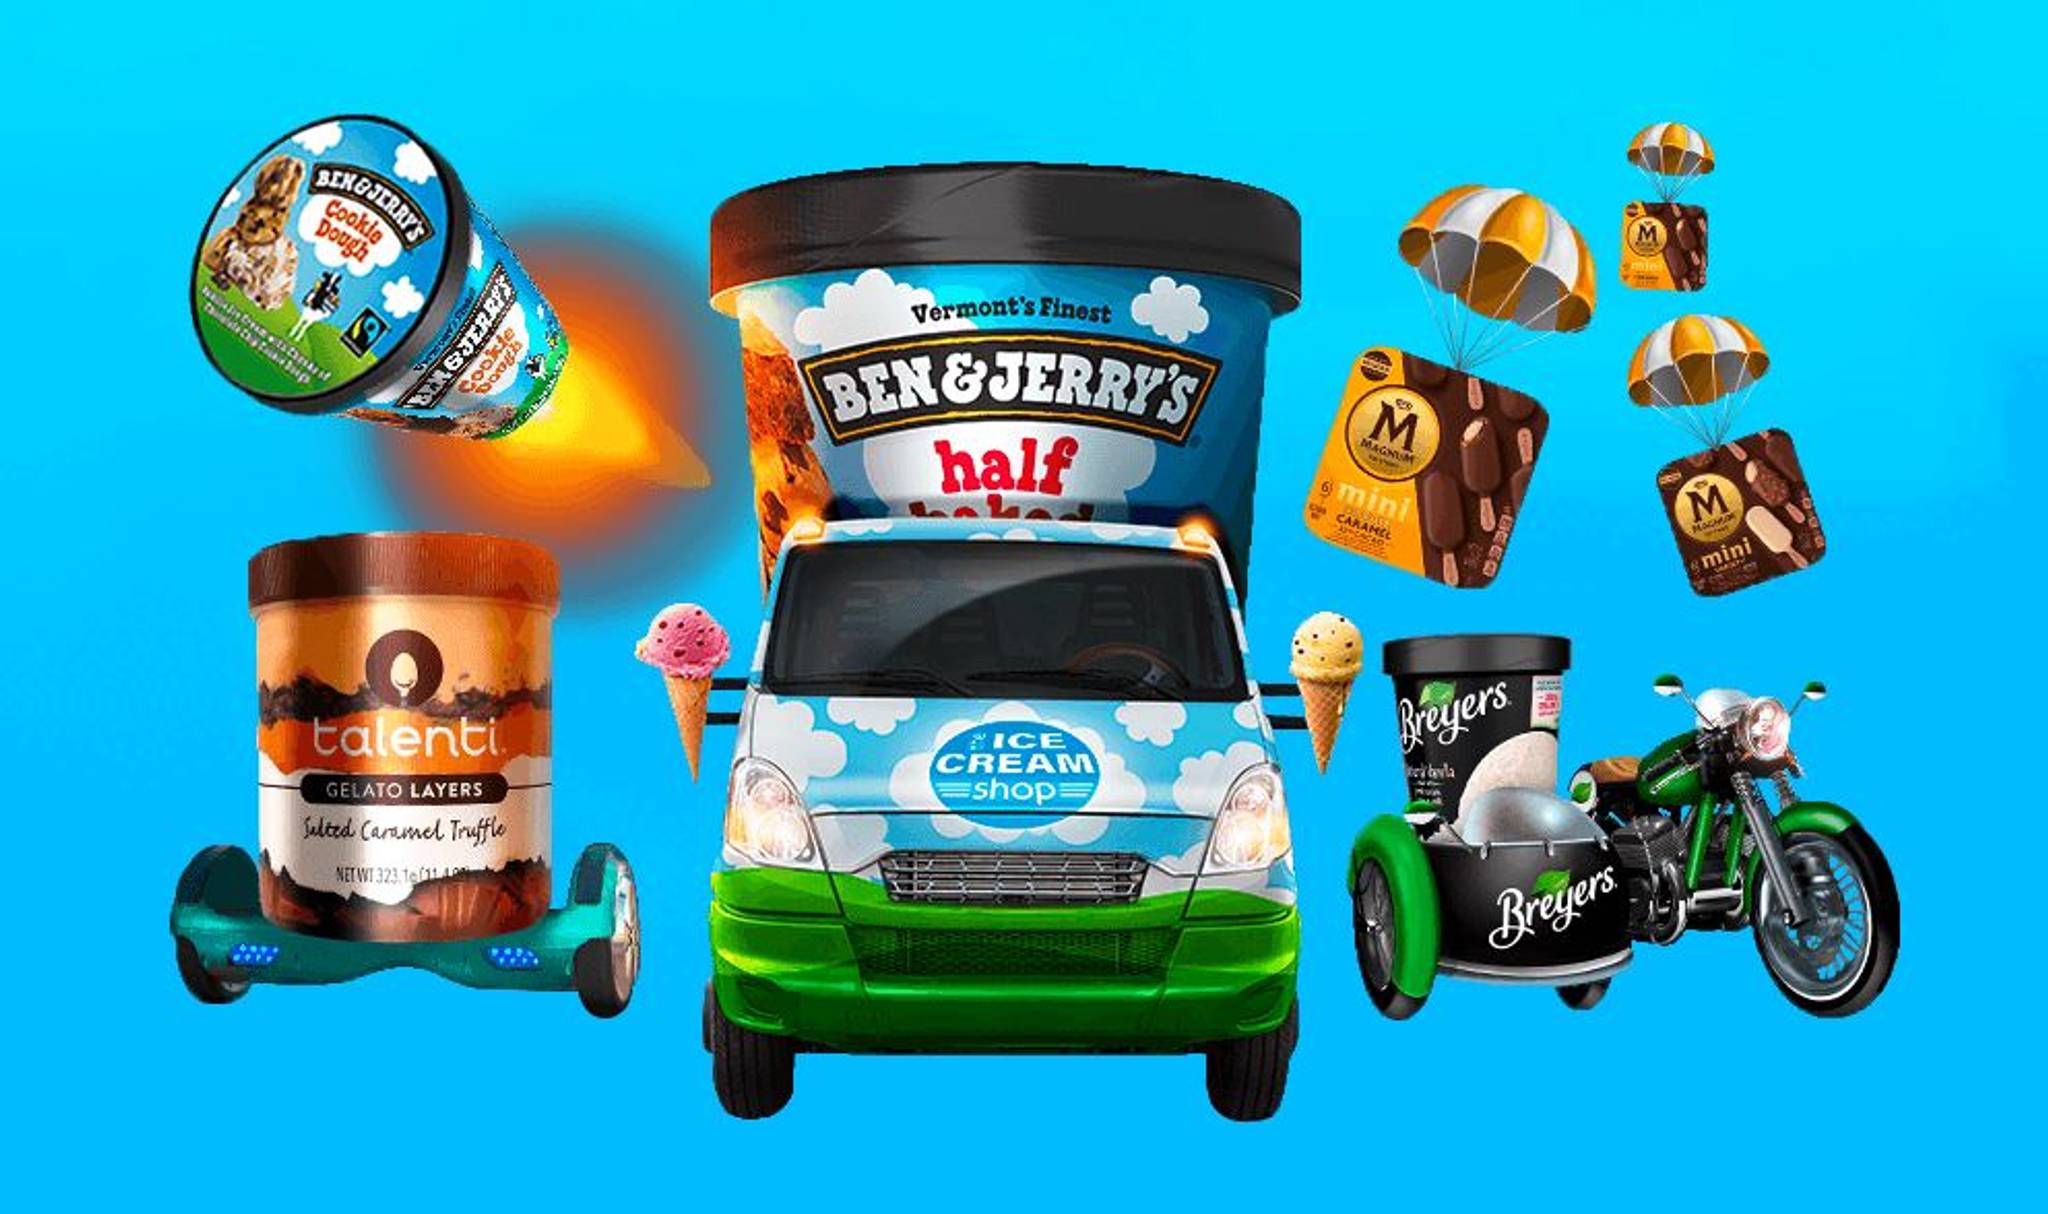 Robomart's ice cream truck feeds the convenience-hungry